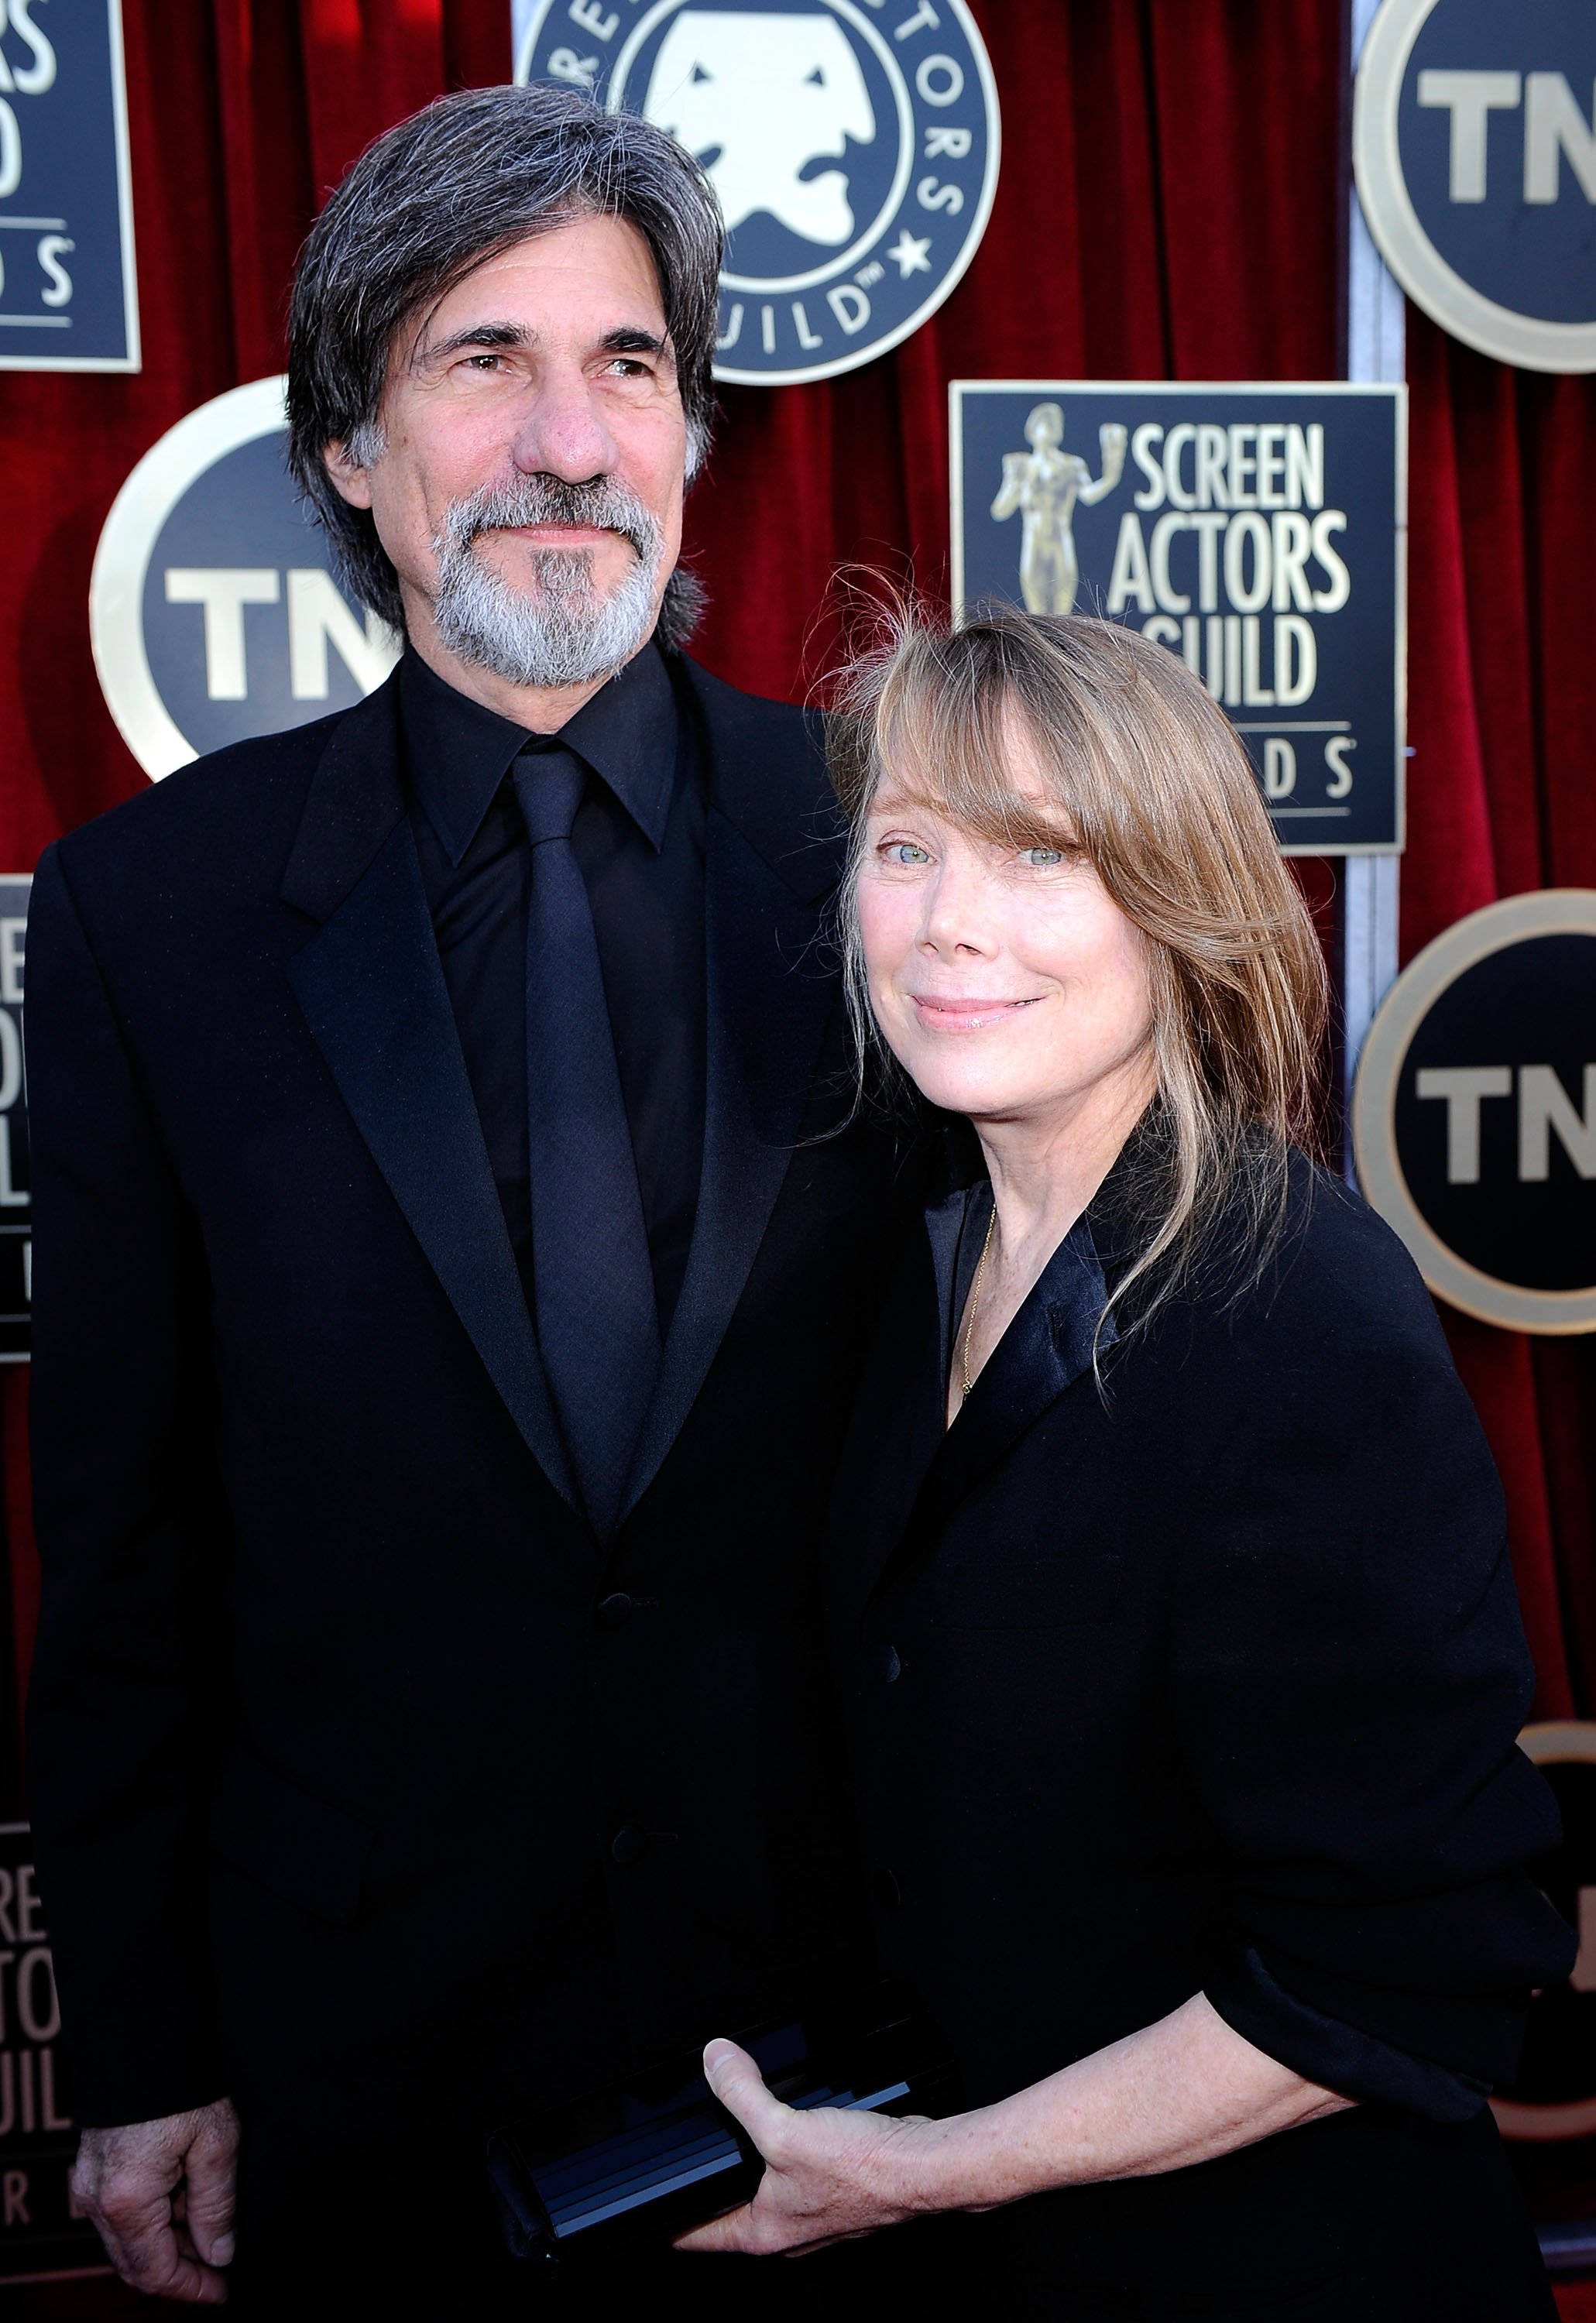 Sissy Spacek and Jack Fisk at The Shrine Auditorium on January 29, 2012, in Los Angeles, California. | Photo: Getty Images